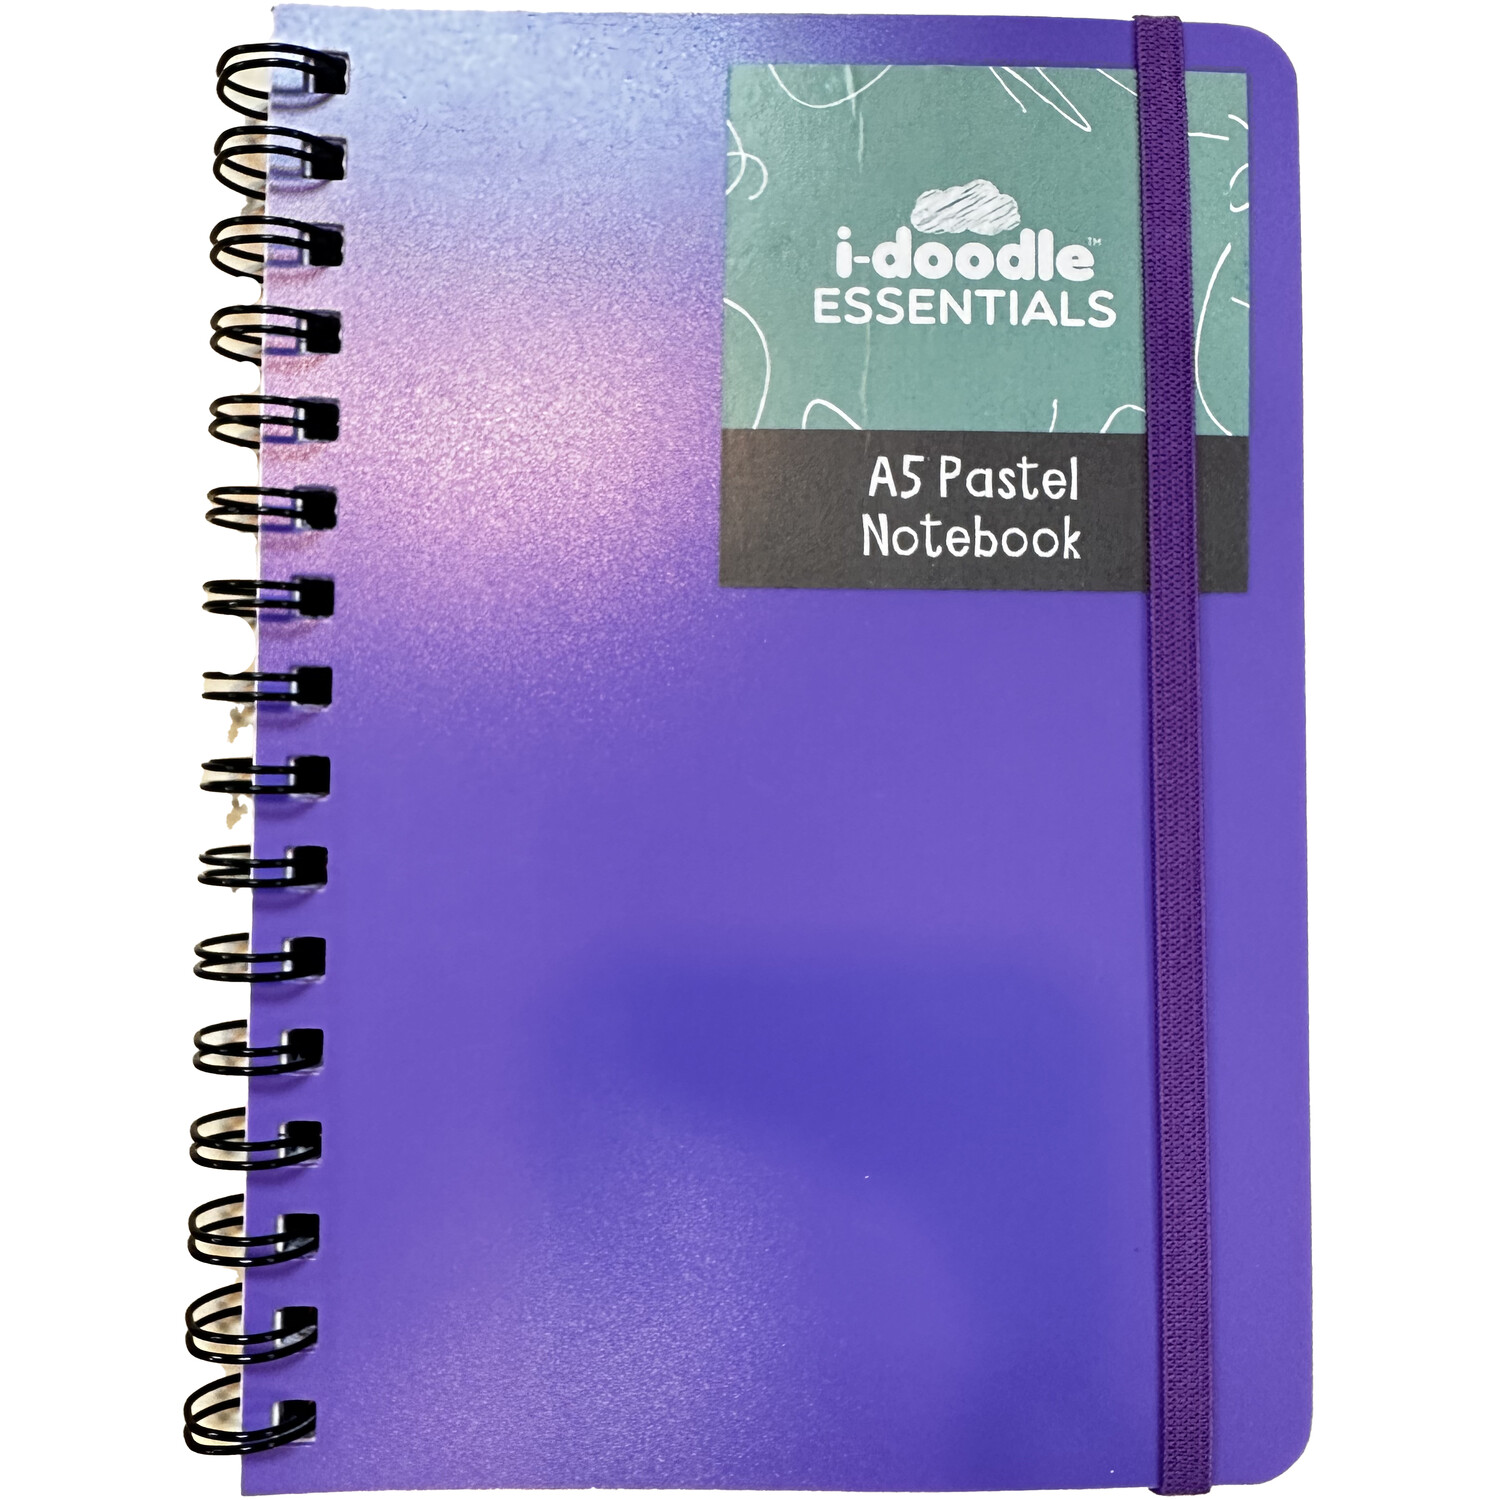 A5 Pastel Notebook Cover Image 2